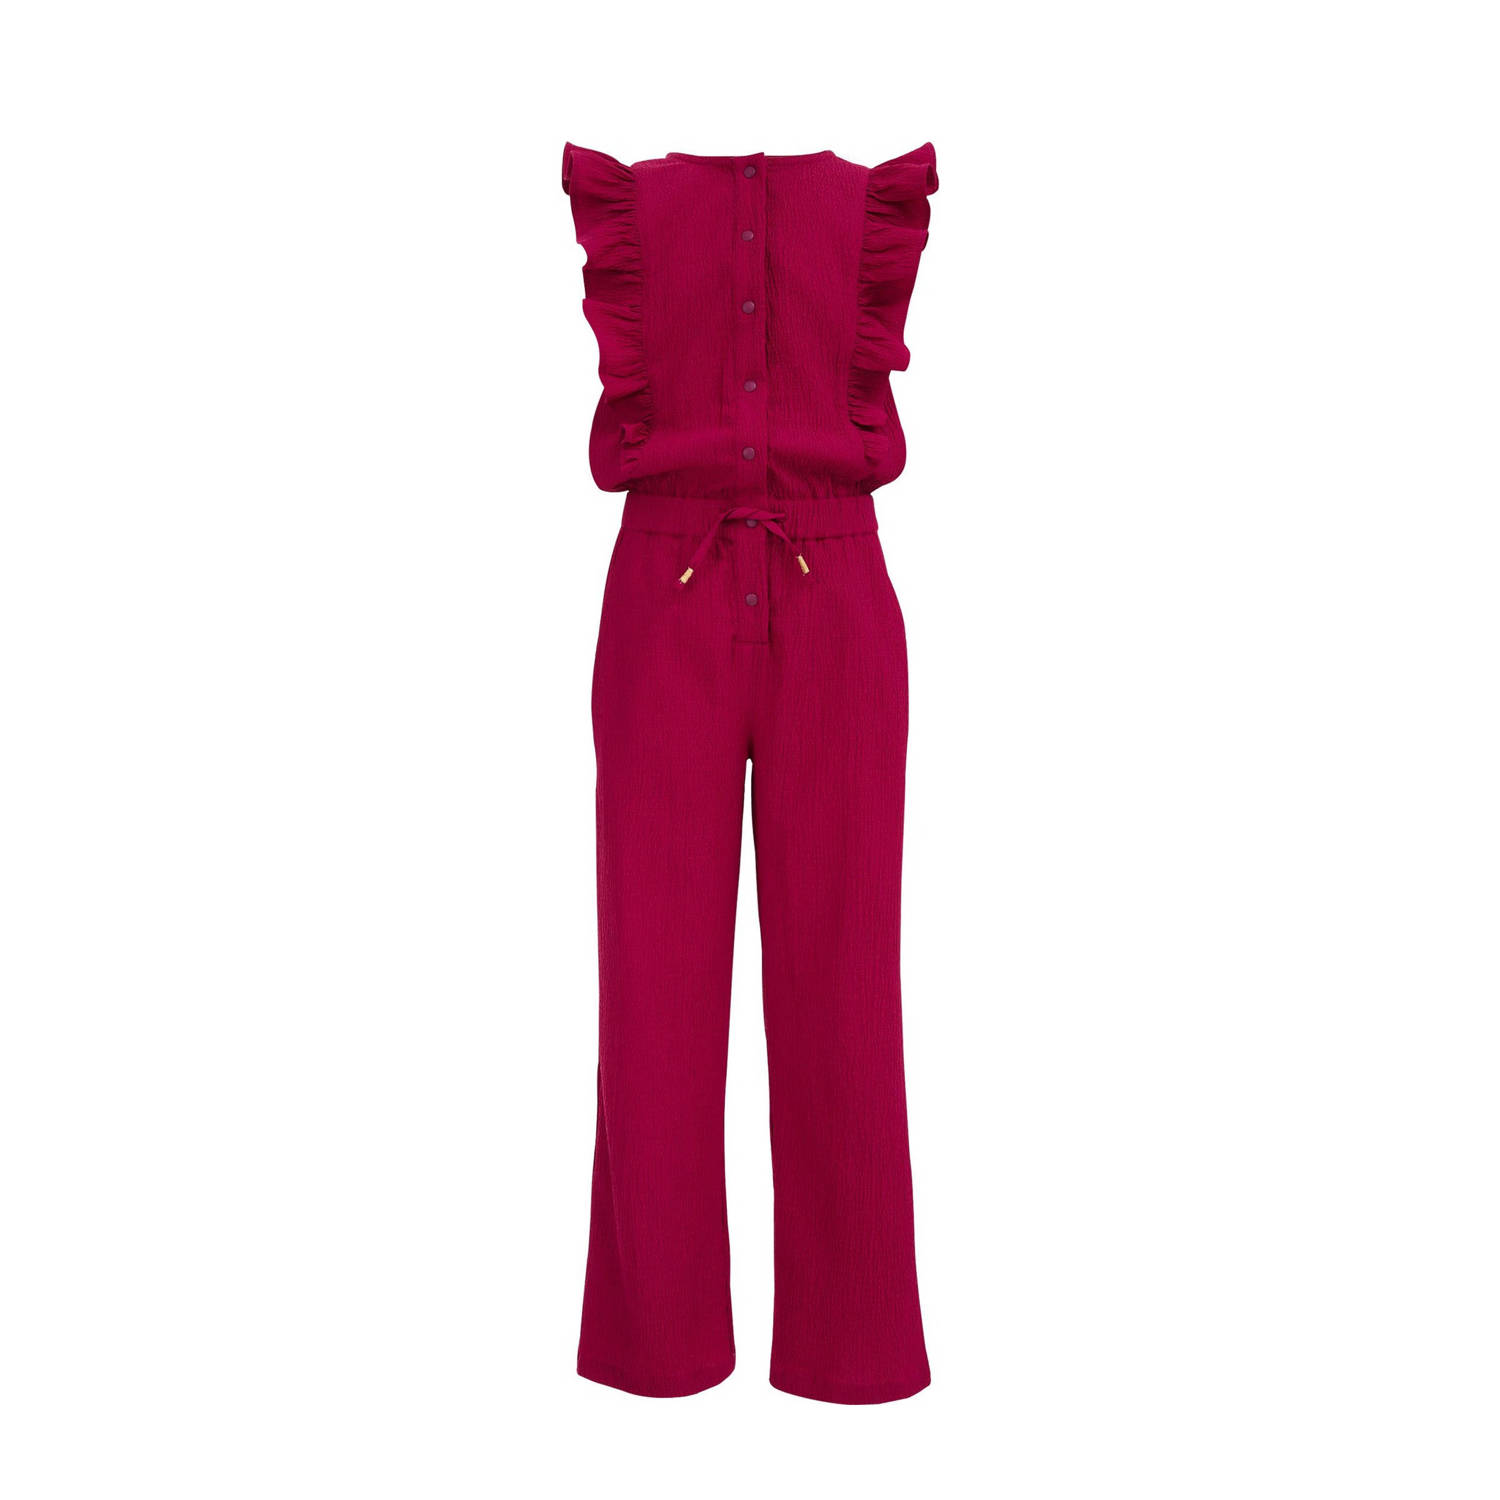 WE Fashion jumpsuit bordeaux rood Paars Meisjes Gerecycled polyester Ronde hals 116